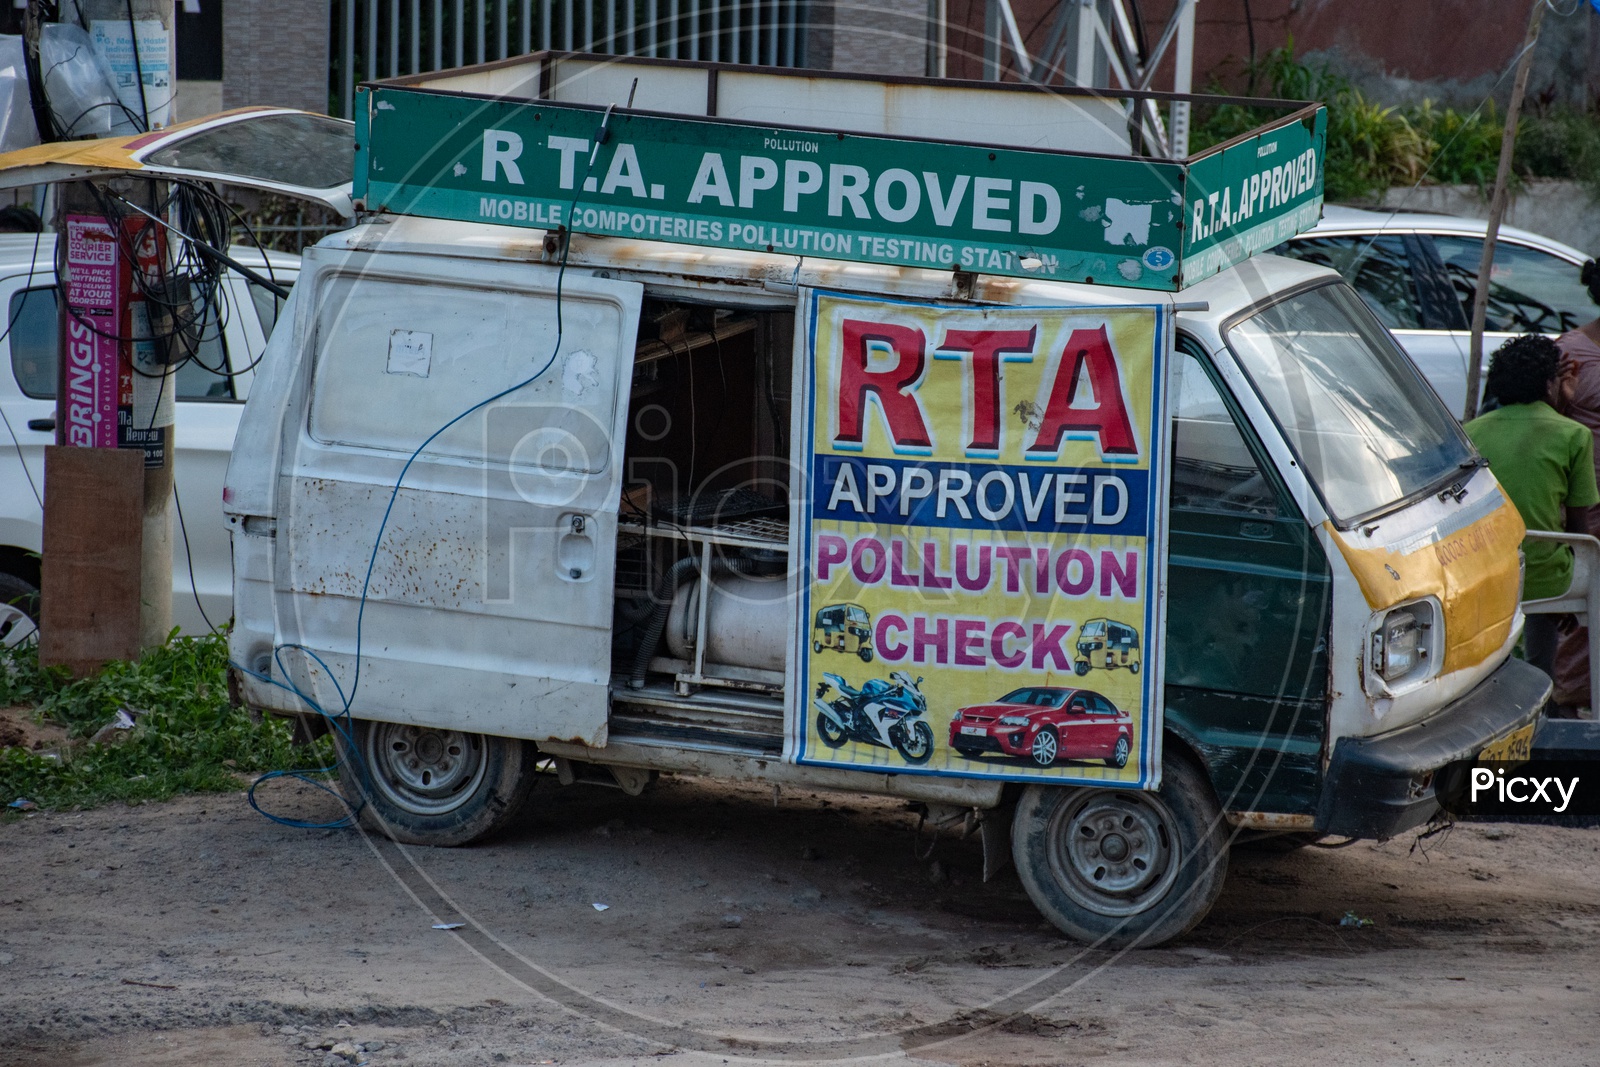 R.T.A approved Pollution check vehicle.